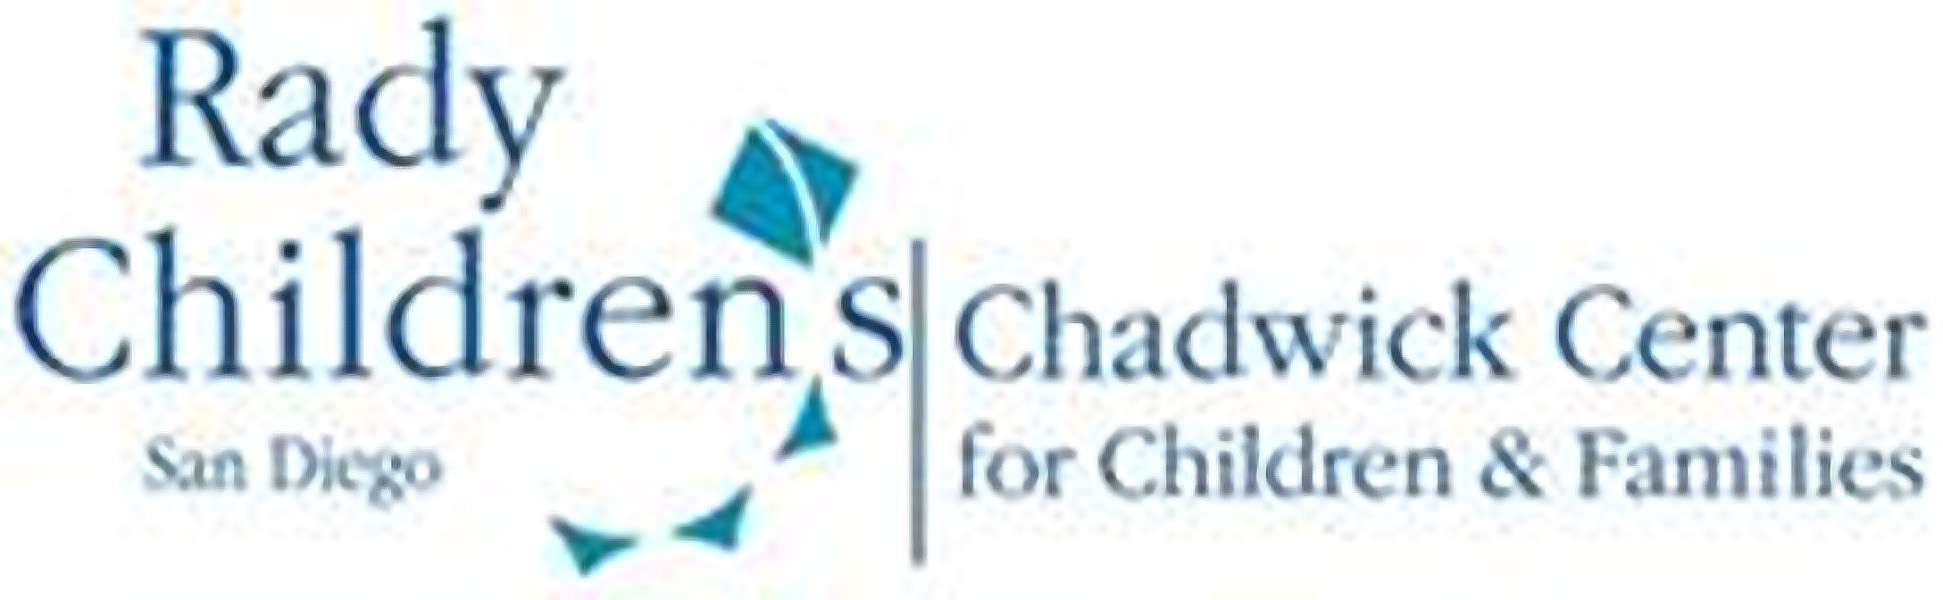 Logo for the Chadwick Center for Children & Families